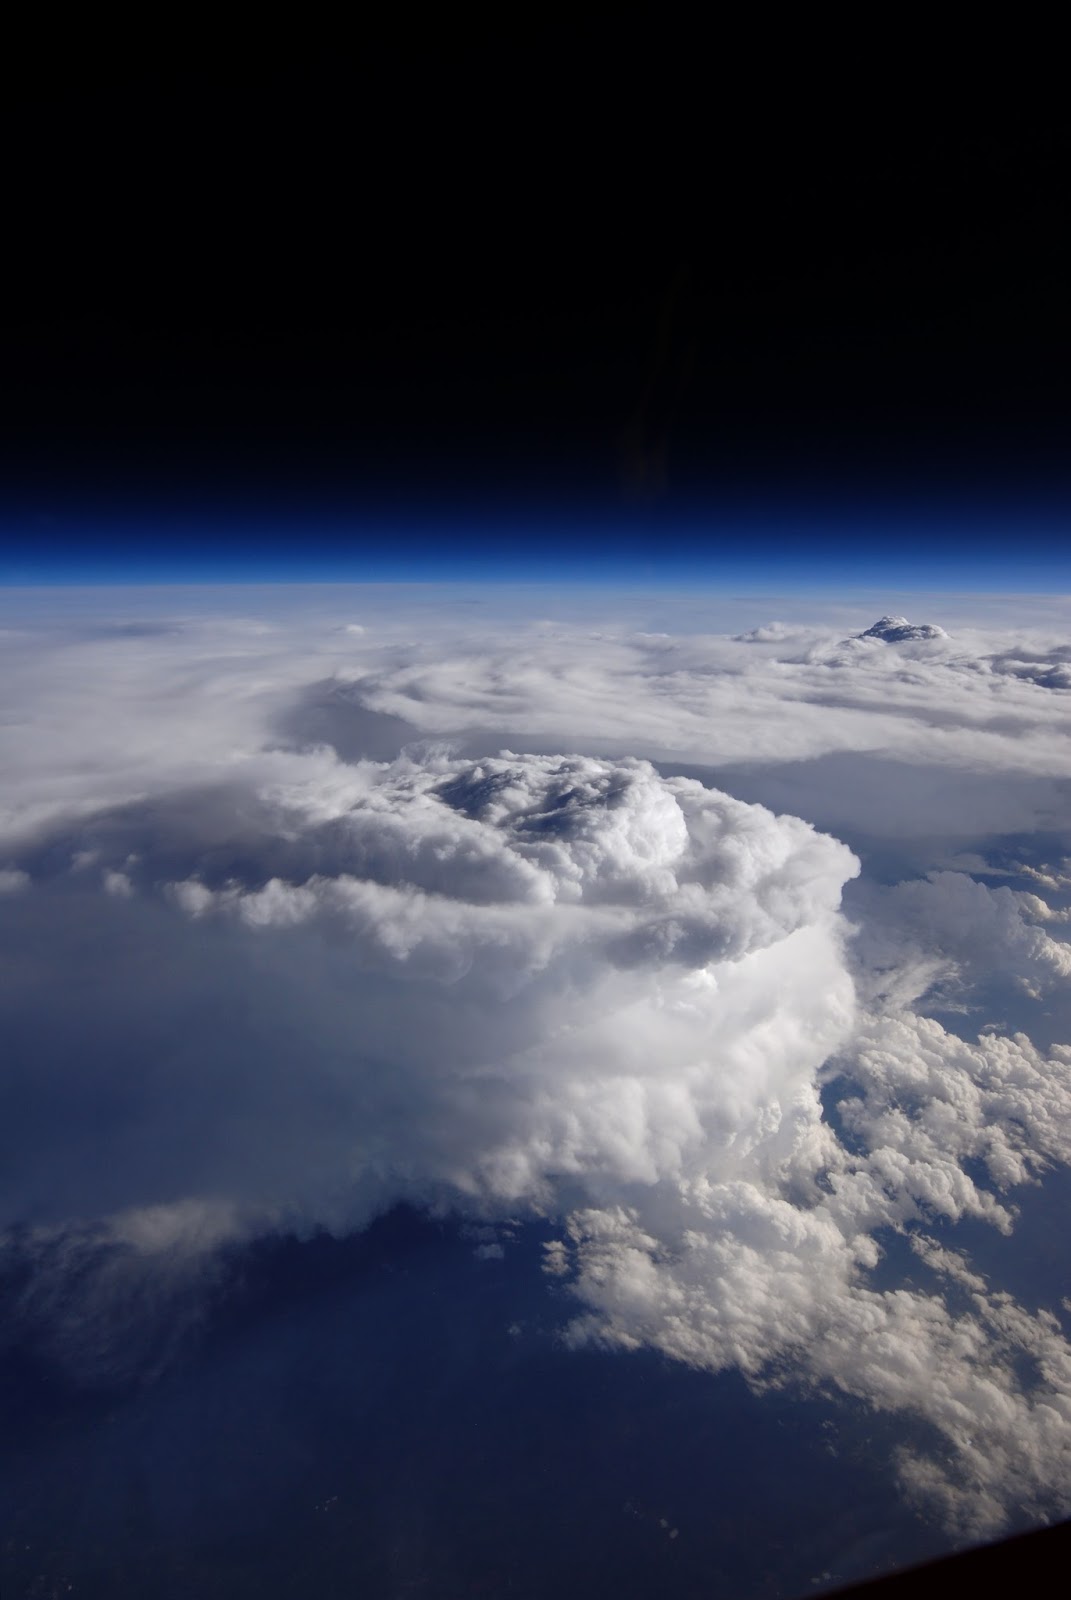 Storm Cell over the Southern Appalachian Mountains Storm Cell over the Southern Appalachian Mountains   This storm cell photo was taken from NASA's high-altitude ER-2 aircraft on May 23, 2014, during a study aimed at gaining a better understanding of precipitation over mountainous terrain. The Integrated Precipitation and Hydrology Experiment, or IPHEx, field campaign is part of the ground validation effort for the Global Precipitation Measurement (GPM) mission, an international satellite mission led by NASA and the Japan Aerospace Exploration Agency. GPM's Core Observatory launched Feb. 27, 2014, to provide next-generation observations of rain and snow worldwide every three hours. But to get accurate measurements from space, scientists have to understand what is happening on the ground.  For the six-week IPHEx field campaign over the southern Appalachian mountains, the NASA team and their partners at Duke University and NOAA's Hydrometeorological Test Bed set up ground stations with rain gauges and ground radar throughout western North Carolina. In addition to the ground sites, they also collected data sets from satellites and two aircraft.  The NASA ER-2 aircraft that deployed to Robins Air Force Base in Warner Robins, Georgia, was able to fly when rain was in the air. The ER-2's cruising altitude of 65,000 feet kept it well above the storm systems it was observing, allowing it to act as a proxy-satellite. The aircraft carried a suite of instruments, including three that took measurements similar to those taken by GPM's Core Observatory.  Image Credit: NASA / Stu Broce Explanation from: http://www.nasa.gov/content/storm-cell-over-the-southern-appalachian-mountains/